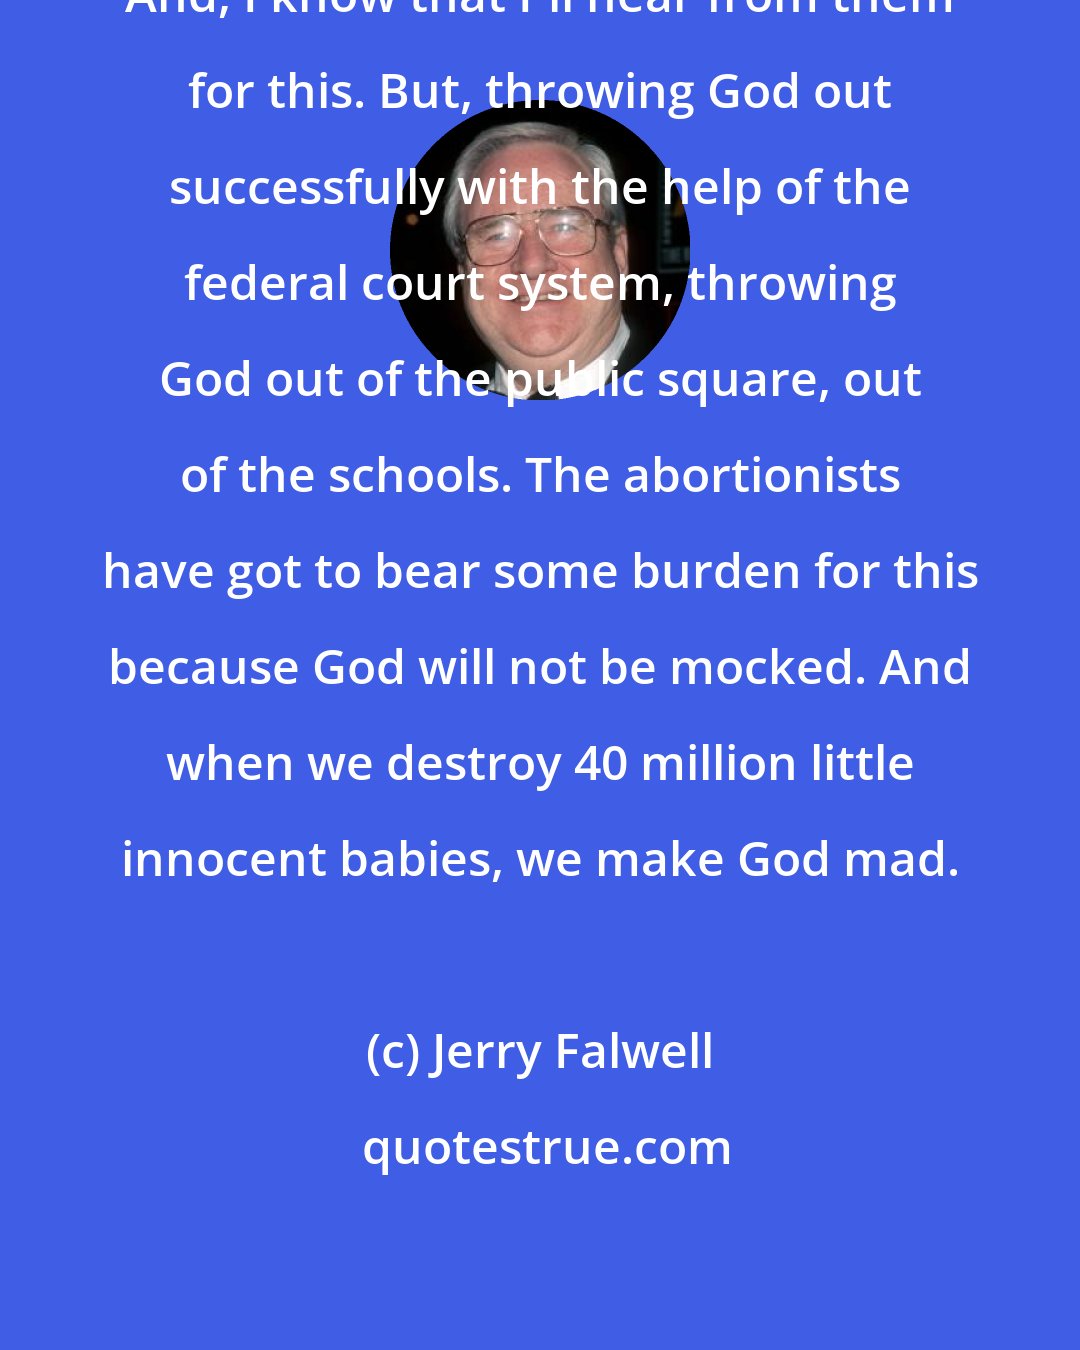 Jerry Falwell: And, I know that I'll hear from them for this. But, throwing God out successfully with the help of the federal court system, throwing God out of the public square, out of the schools. The abortionists have got to bear some burden for this because God will not be mocked. And when we destroy 40 million little innocent babies, we make God mad.